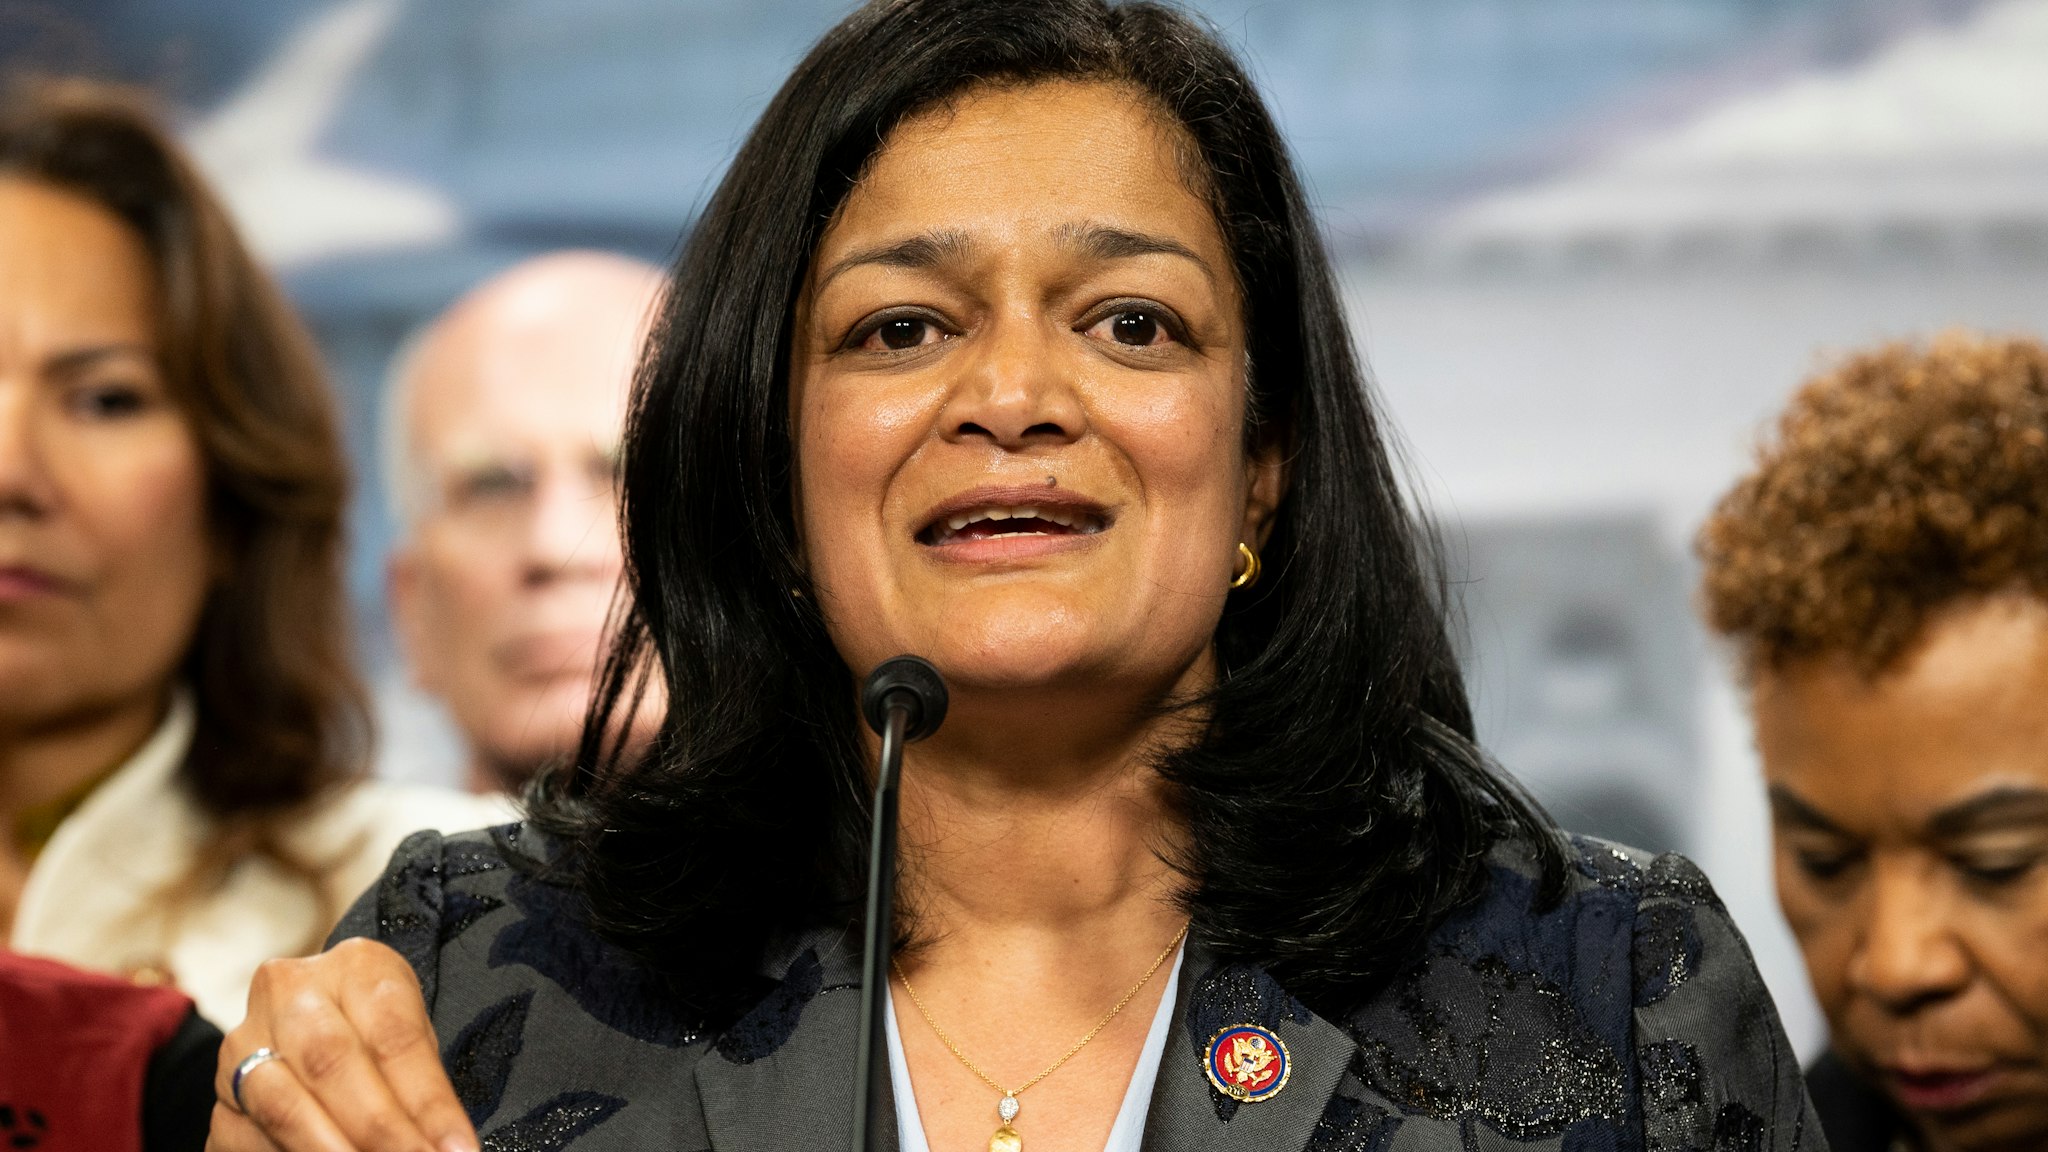 WASHINGTON, UNITED STATES - JANUARY 08 2020: U.S. Representative Pramila Jayapal (D-WA) speaking about the situation in Iran and Iraq at a press conference organized by the Congressional Progressive Caucus (CPC).